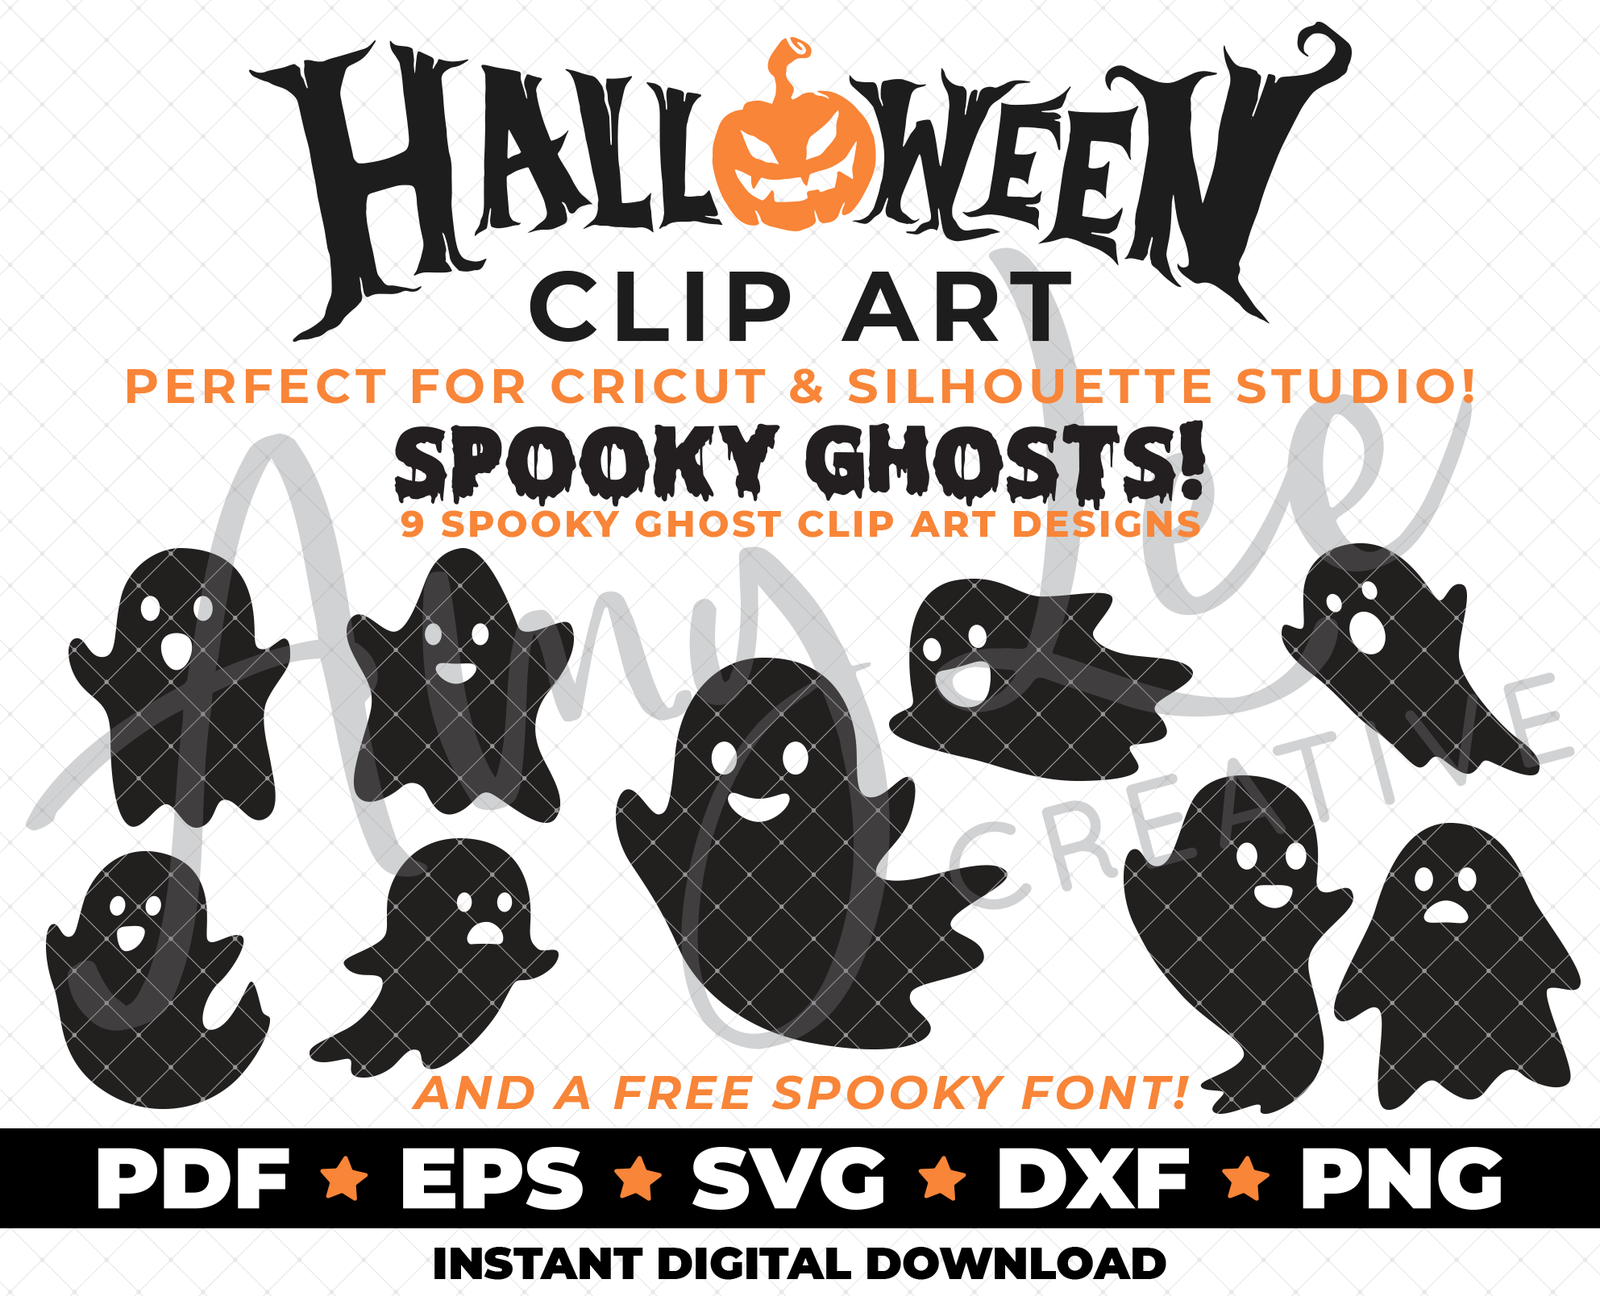 Primary image for SALE: Halloween Clip Art: 9 Spooky Ghosts Plus FREE Font